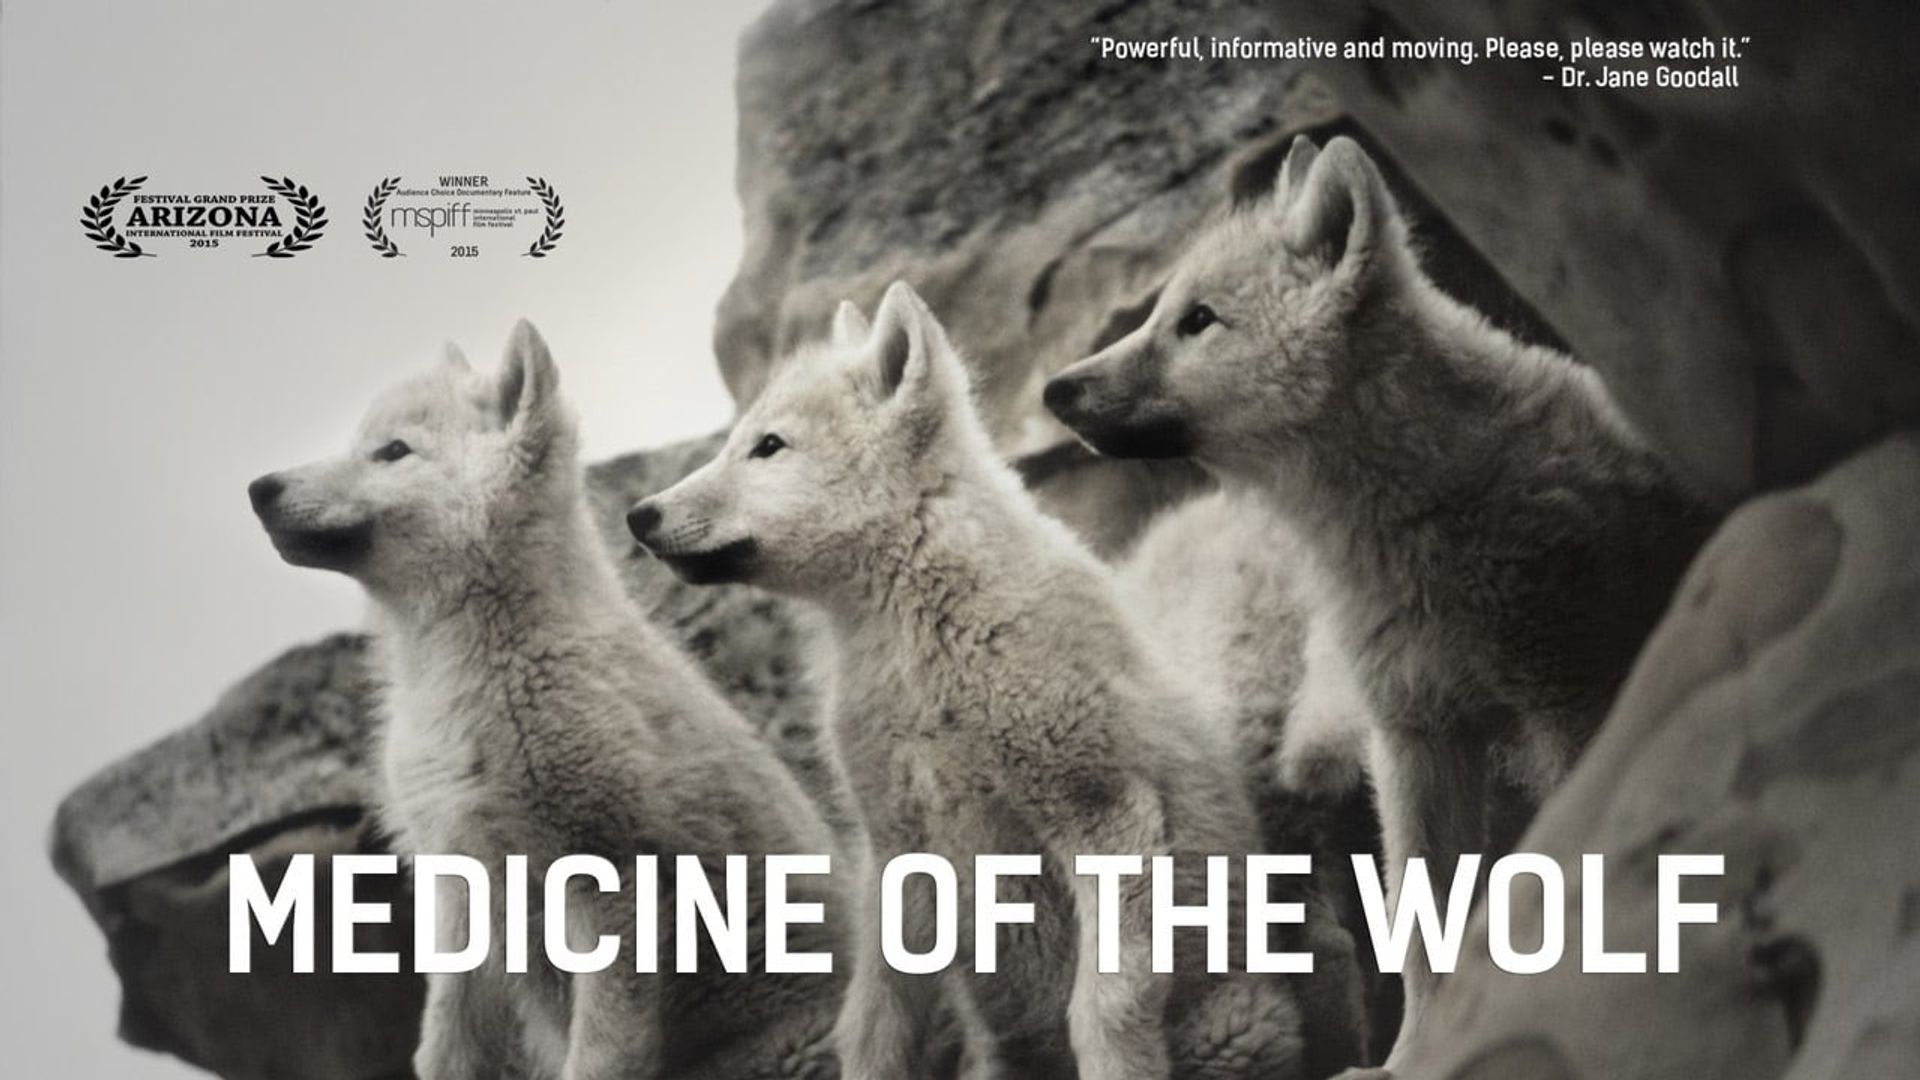 Medicine of the Wolf background